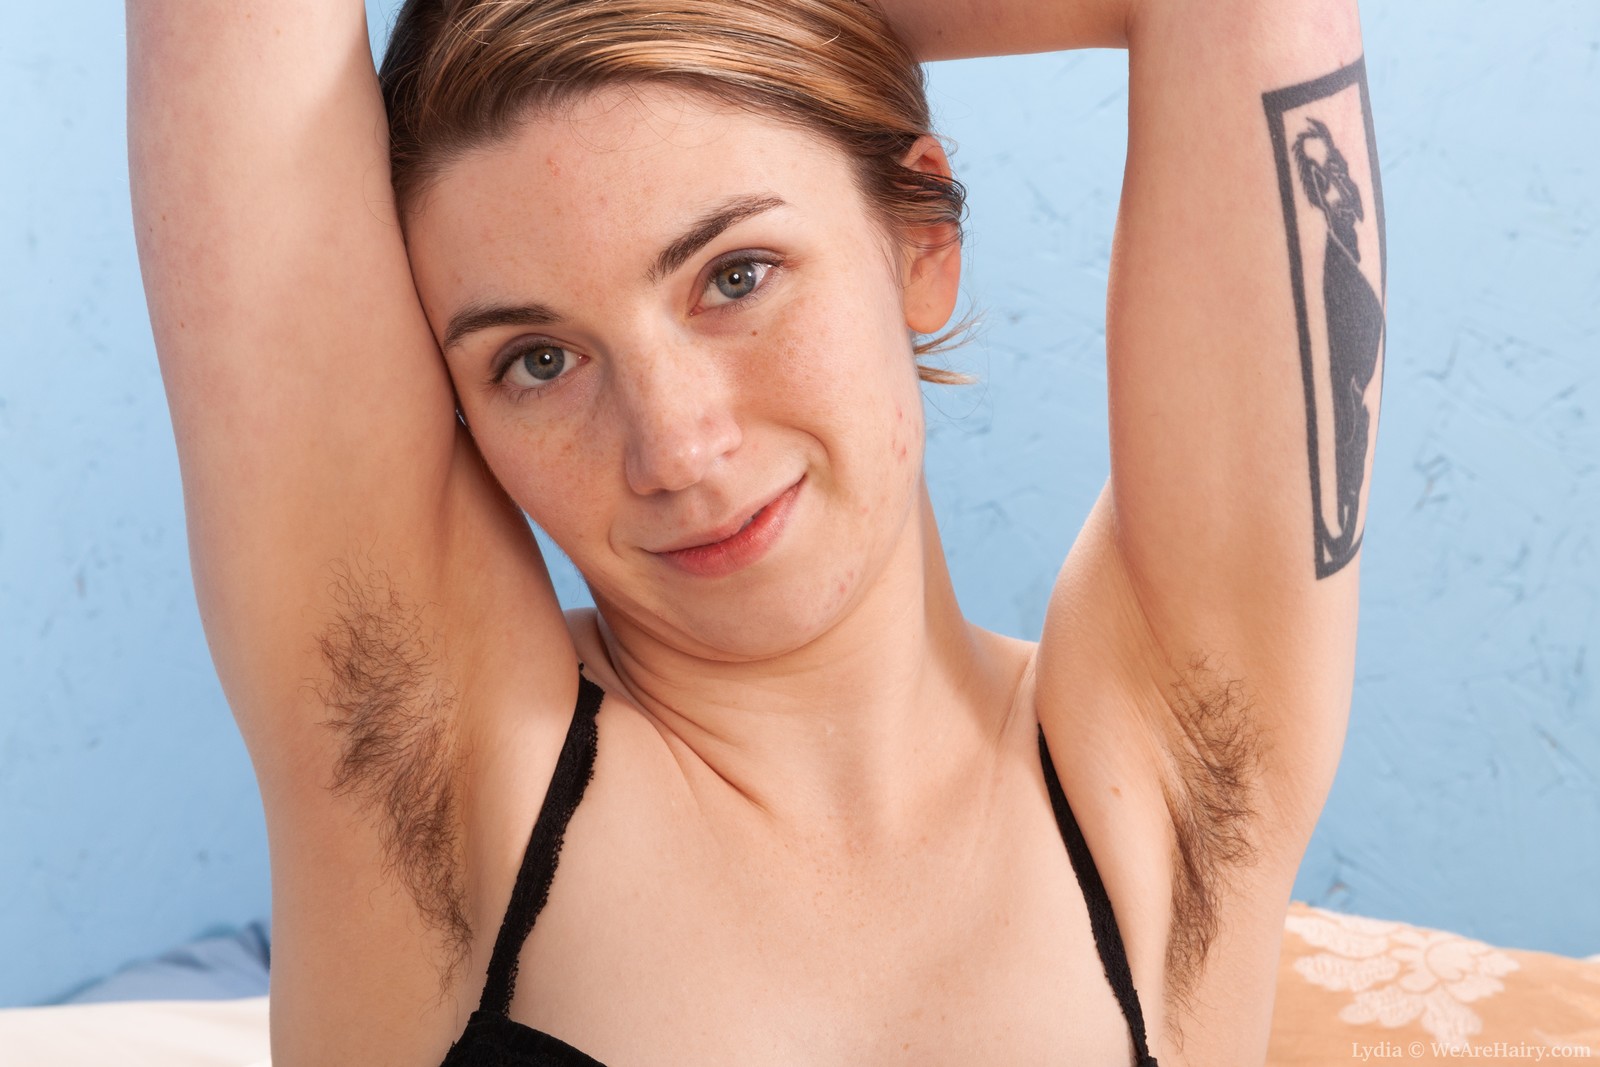 See 100% Exclusive Hairy Movies & Pictures Meet The Natural & Hairy Girls of WeAreHairy.c...